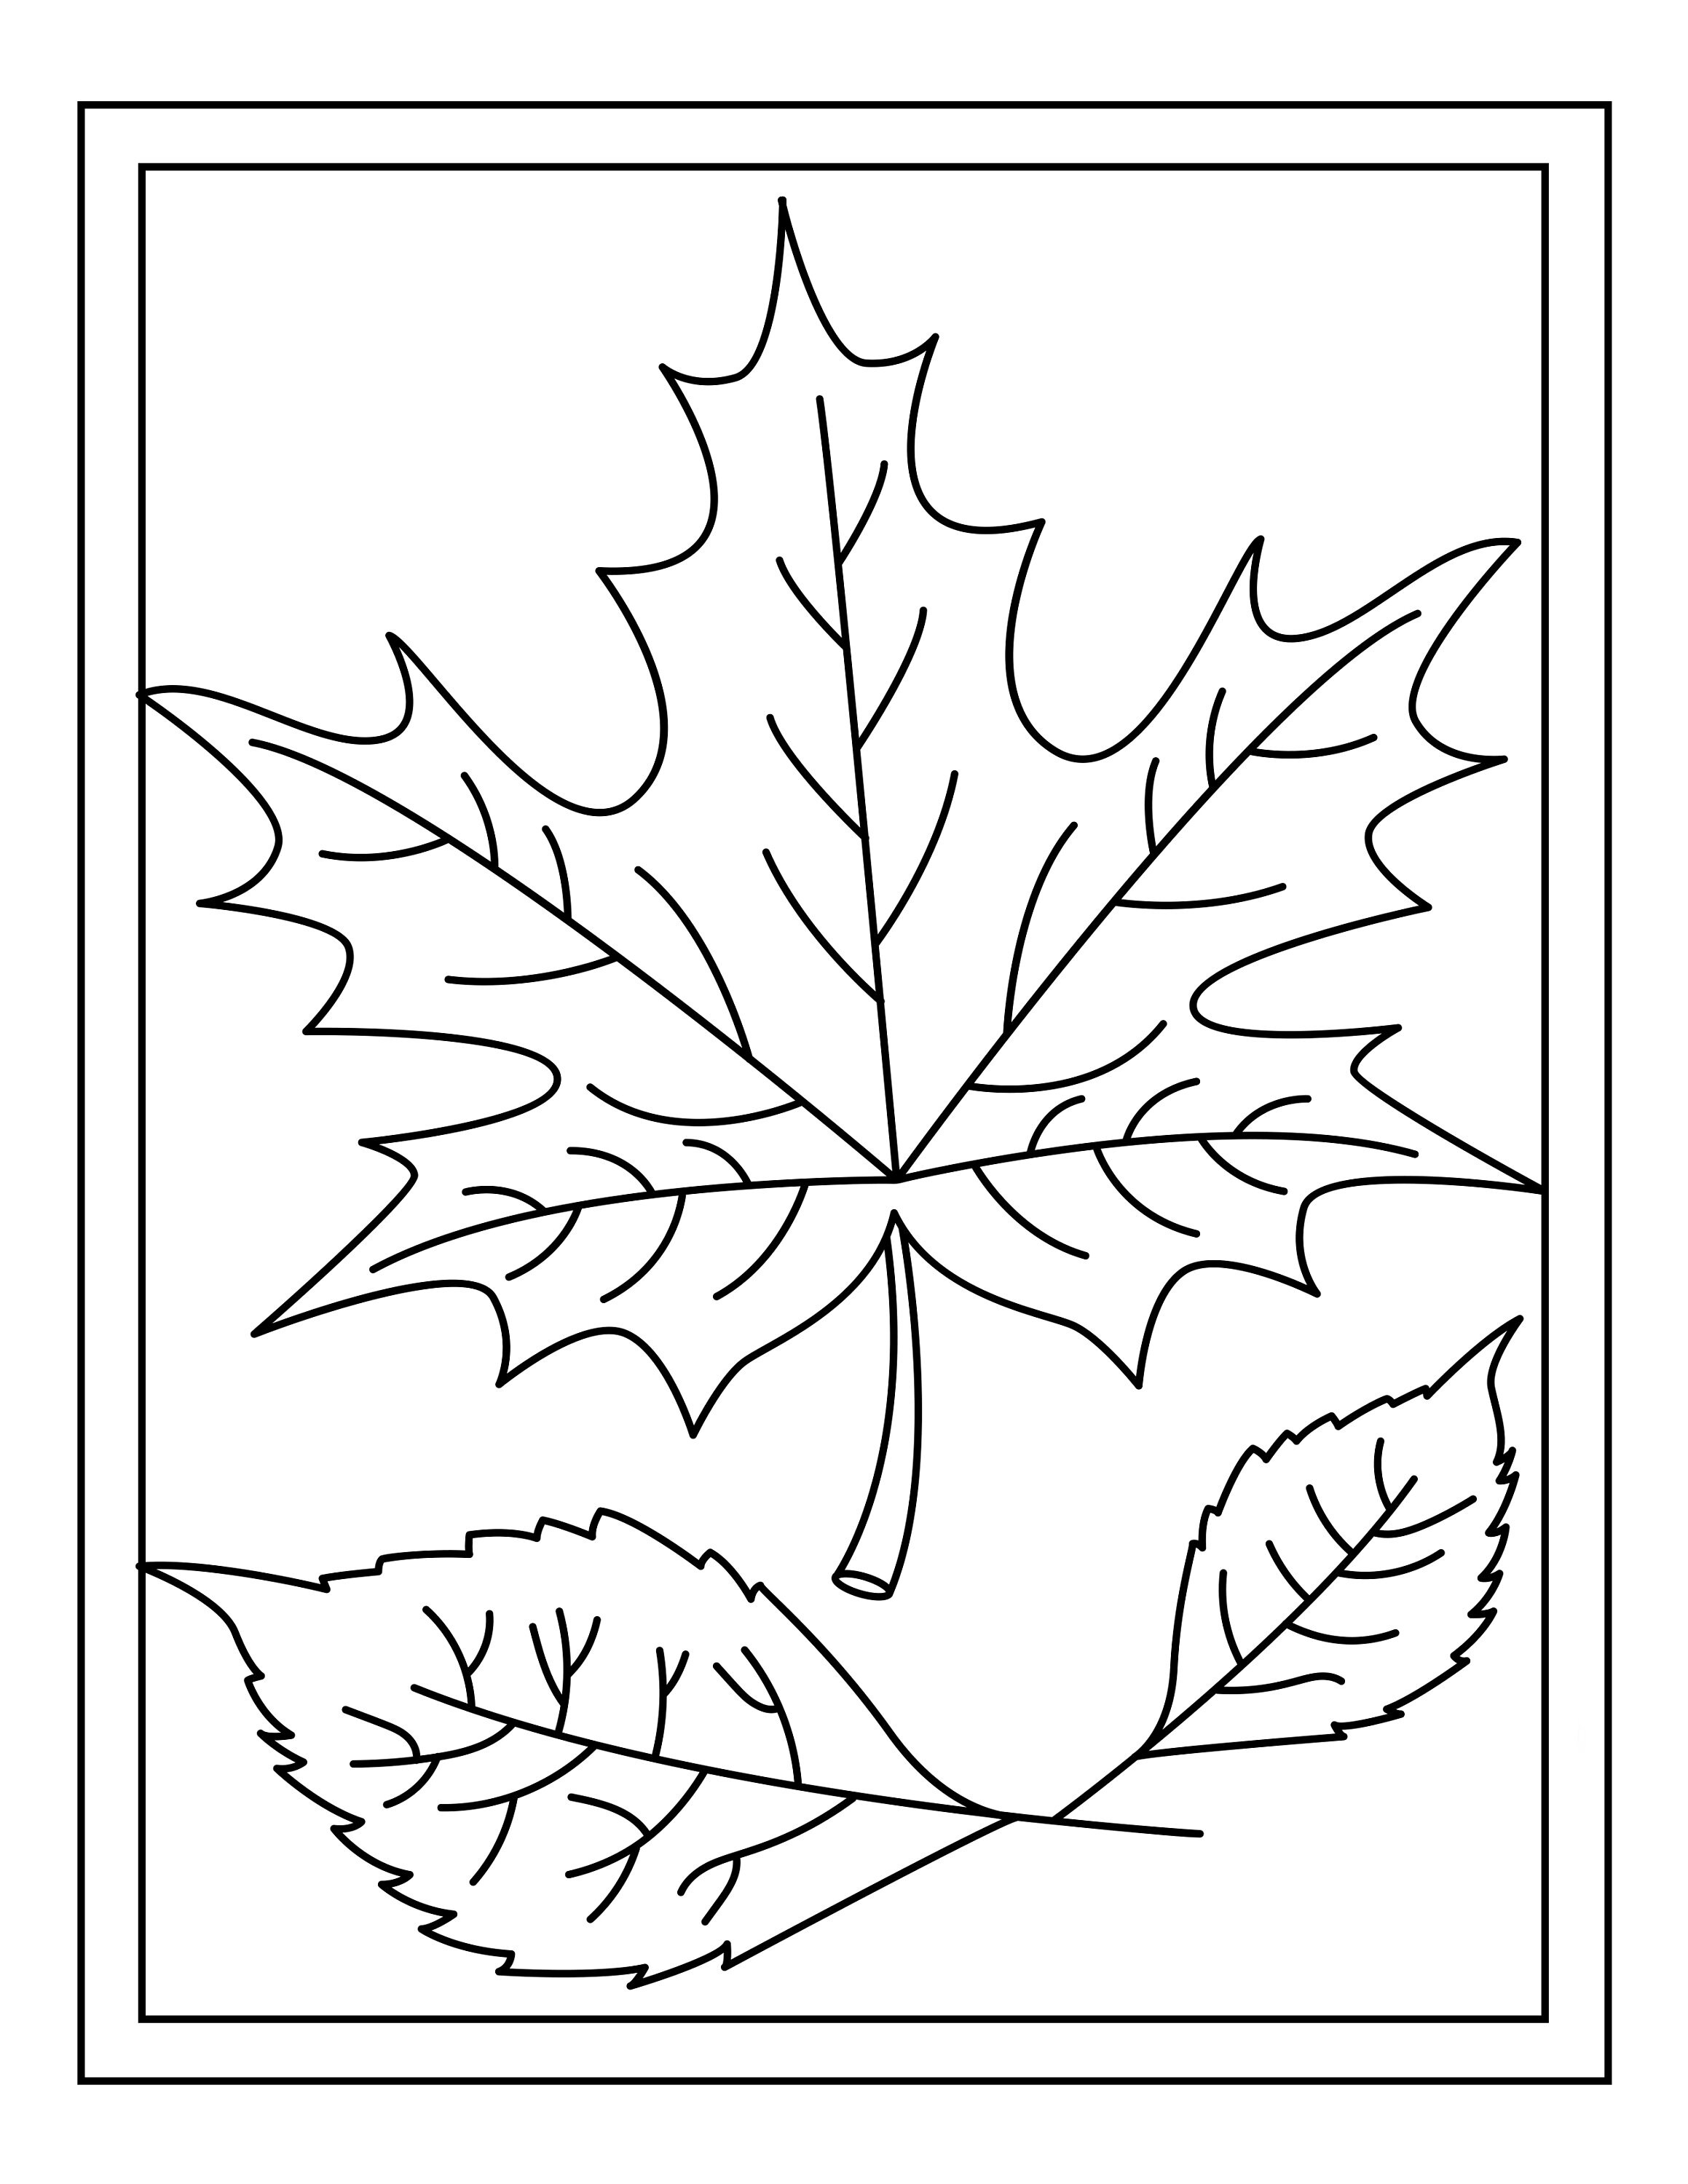 16 x Autumn & Spring Colouring Pages 8.5inch x 11inch premium | Etsy